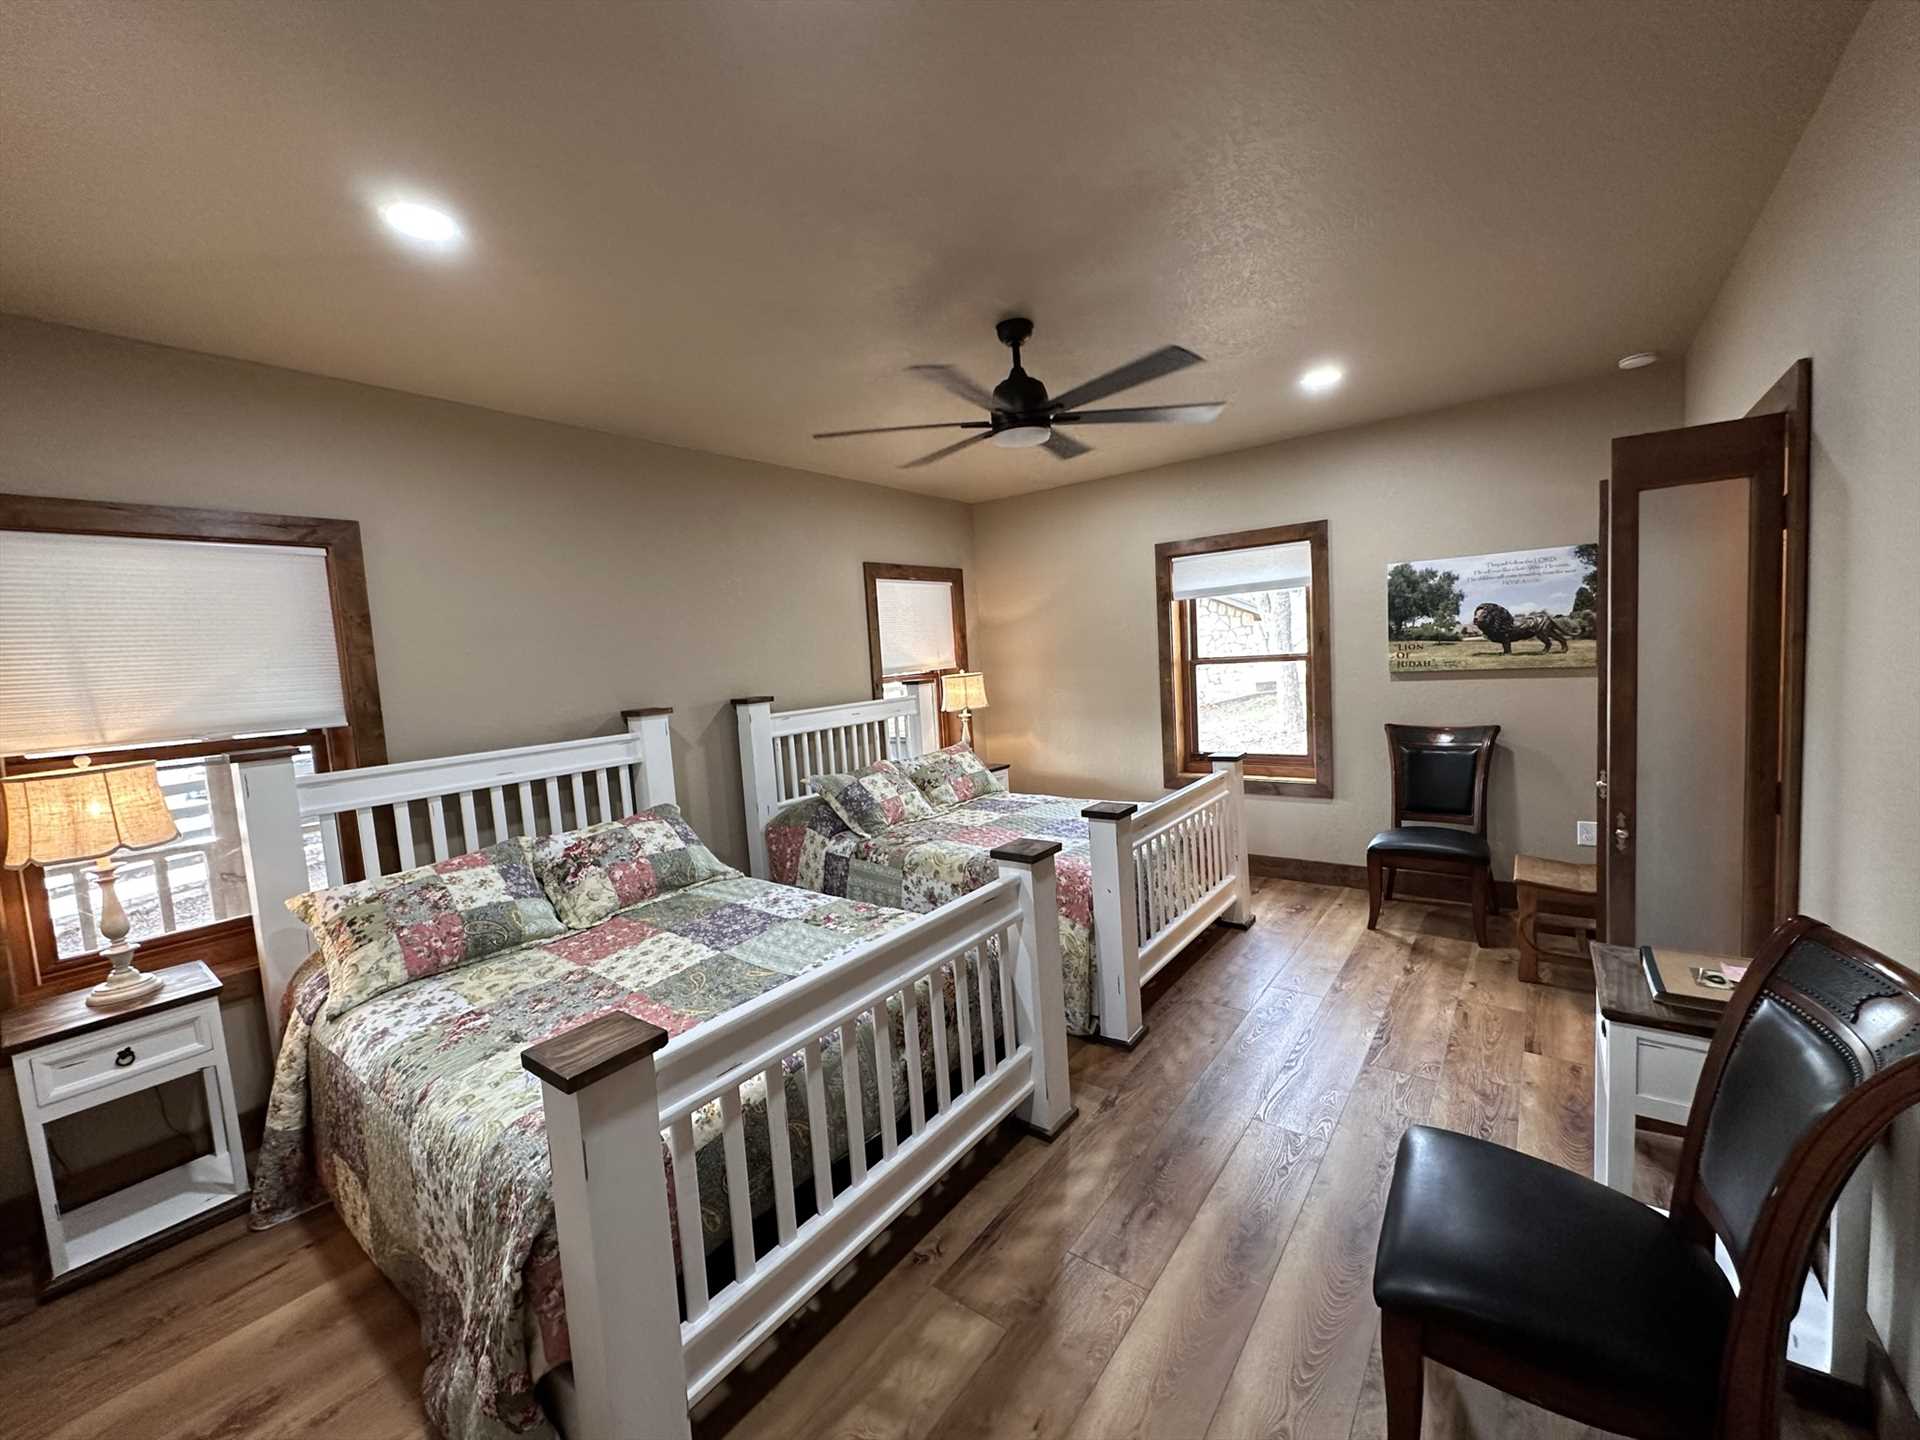                                                 Two plush queen-sized beds with matching woodcraft frames can be found in the roomy master bedroom, and all the sleeping spaces here include clean linens!